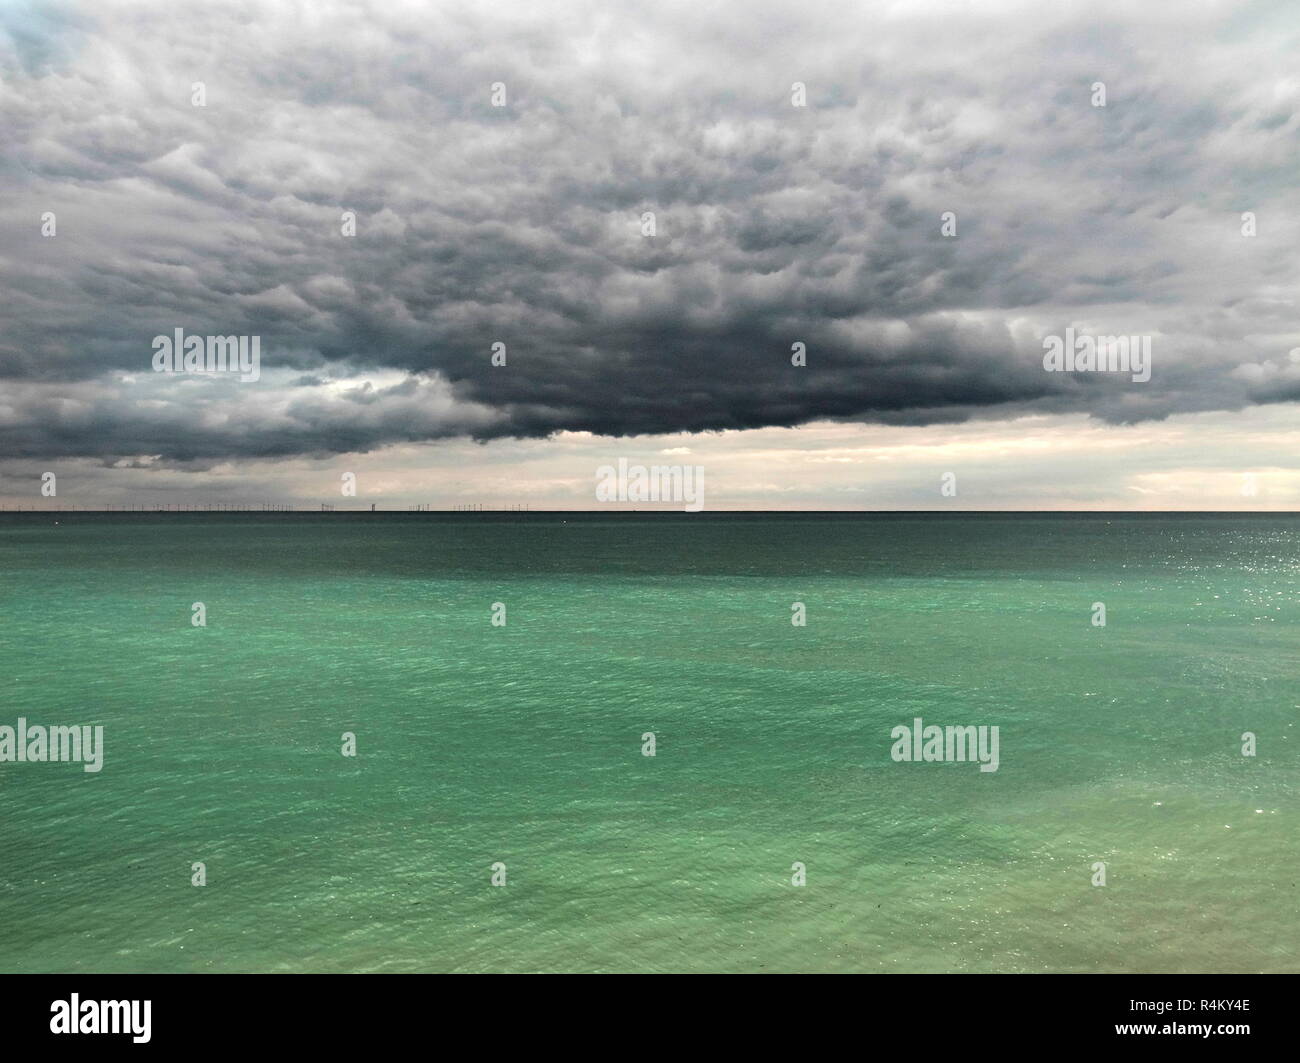 AJAXNETPHOTO. 2018. WORTHING, ENGLAND. - CALM BEFORE THE STORM - BROODING LOW STRATUS CLOUD HOVERS OVER AN EMERALD GREEN SEA LOOKING OUT ACROSS THE CHANNEL.  PHOTO:JONATHAN EASTLAND/AJAX REF:GR181509 8453 Stock Photo